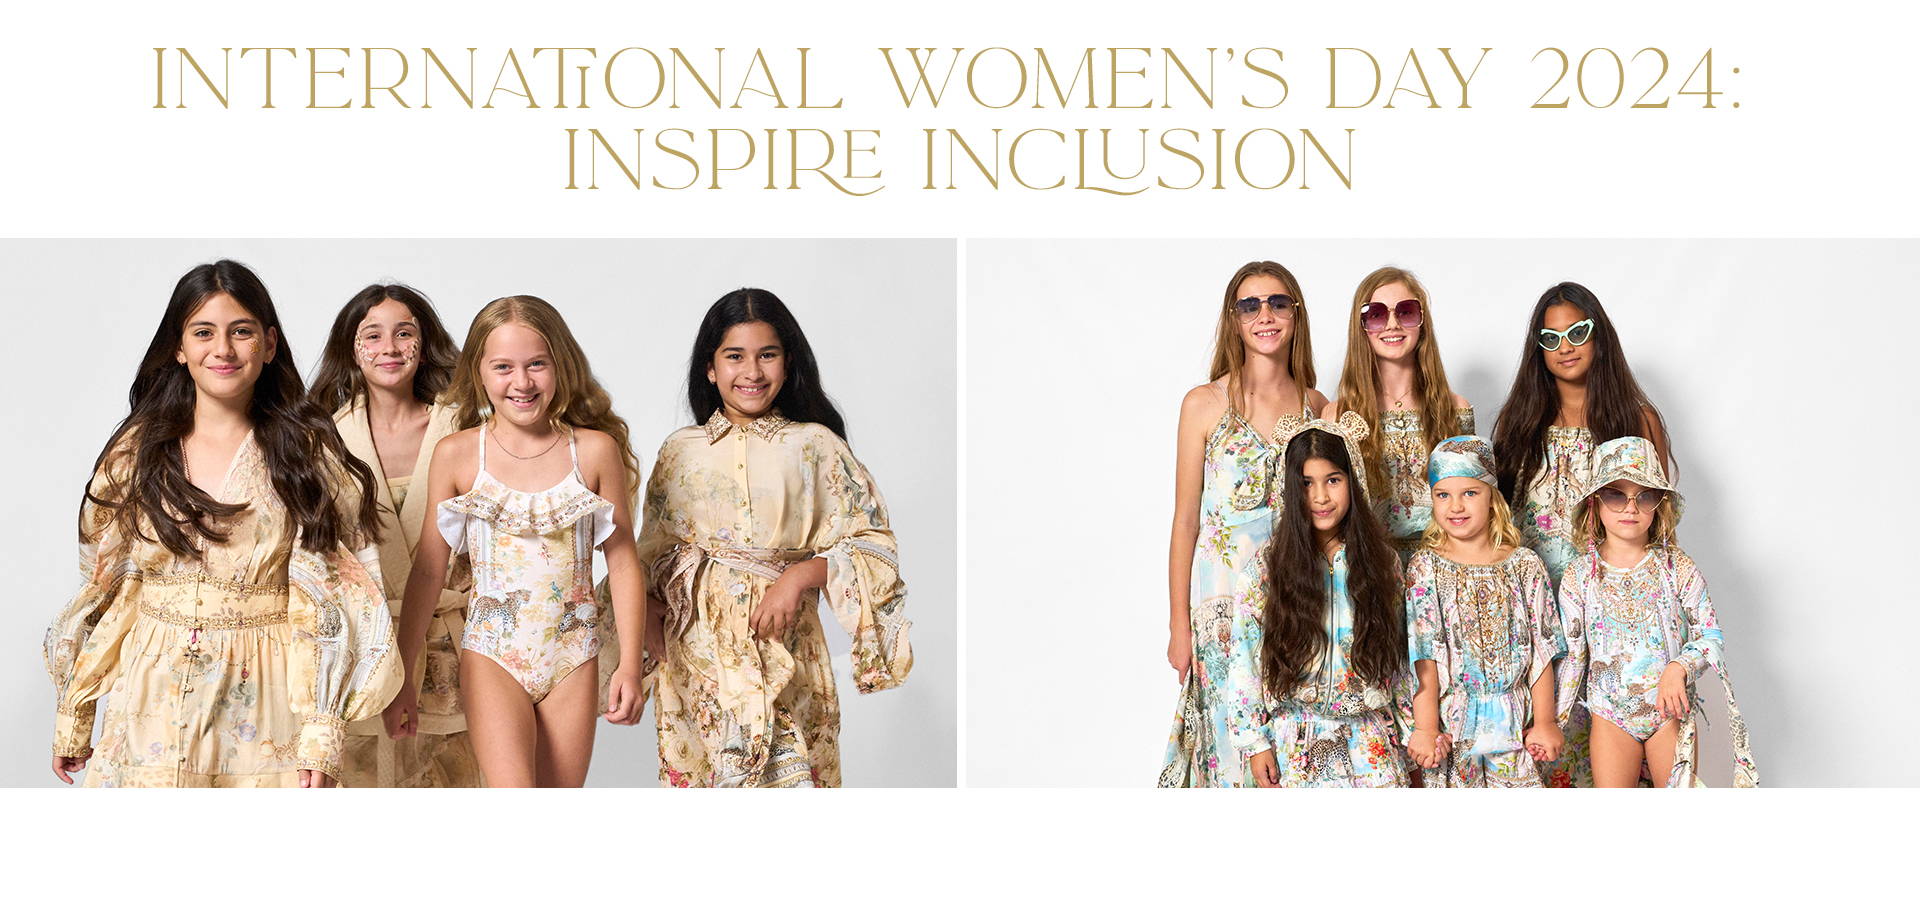 INTERNATIONAL WOMENS DAY 2024: INSPIRE INCLUSION